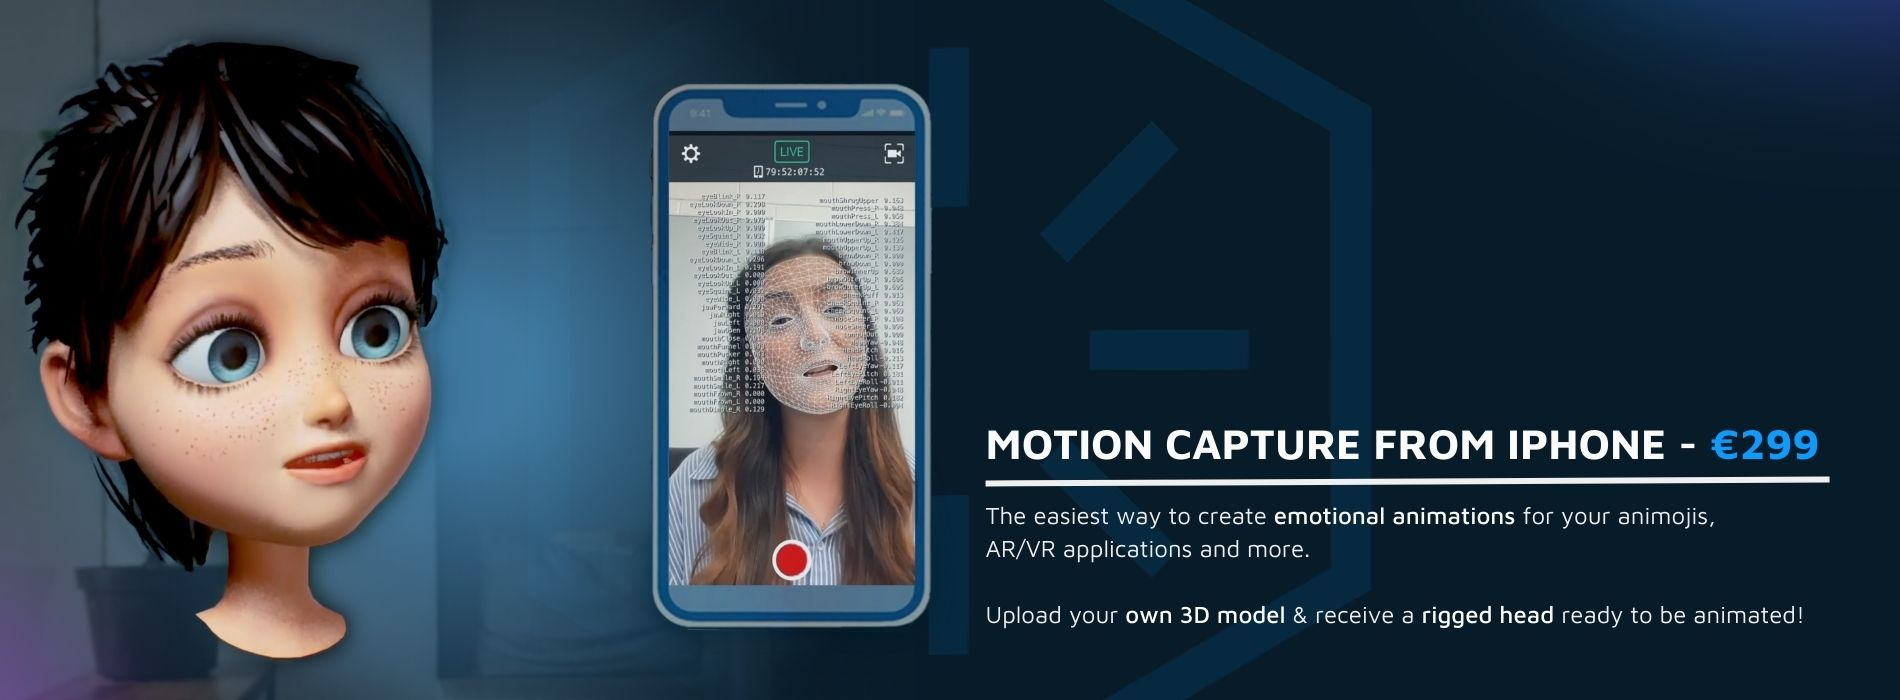 Motion capture from an iphone to make animation on a 3D model